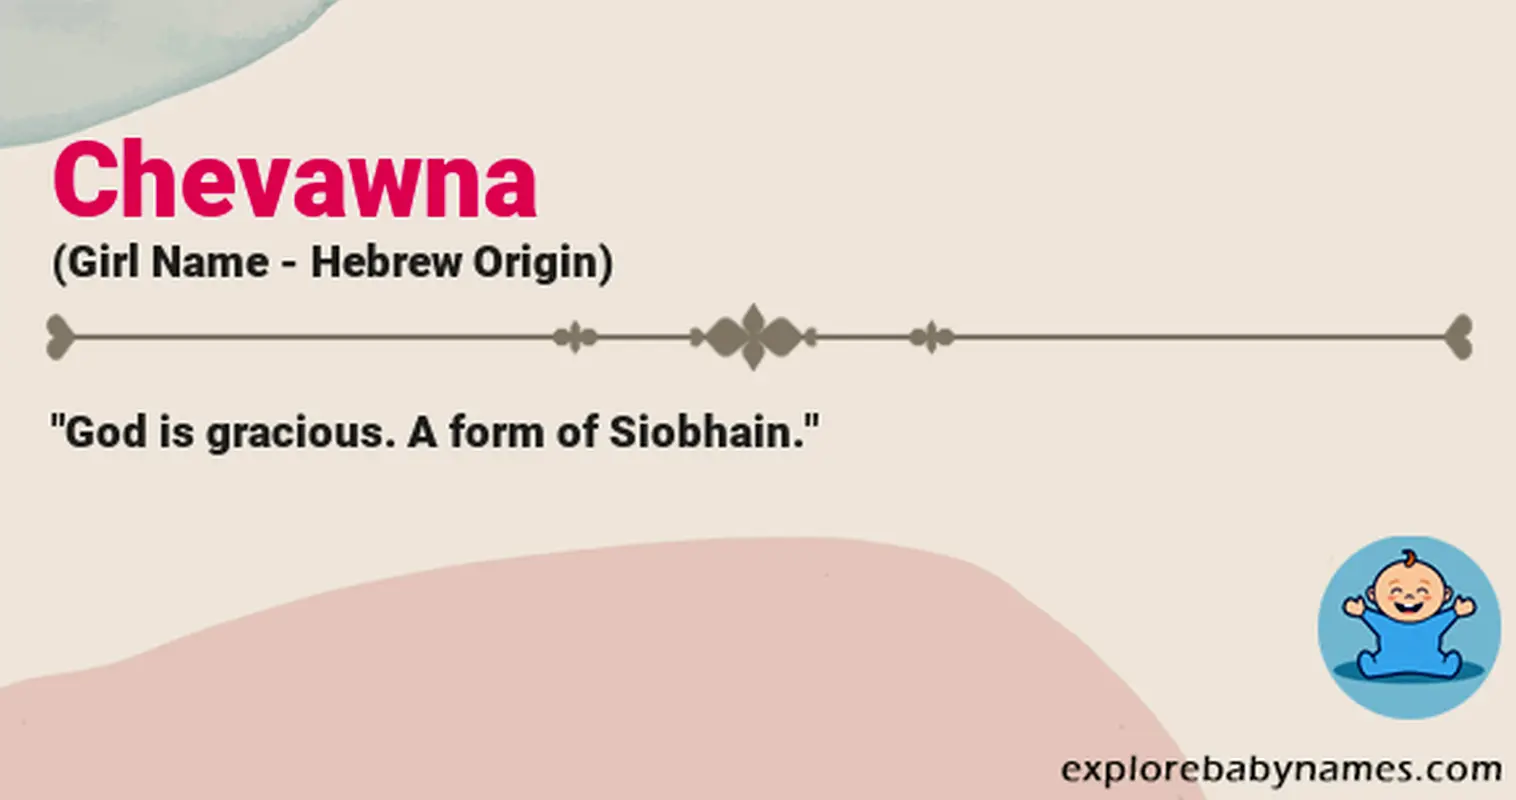 Meaning of Chevawna